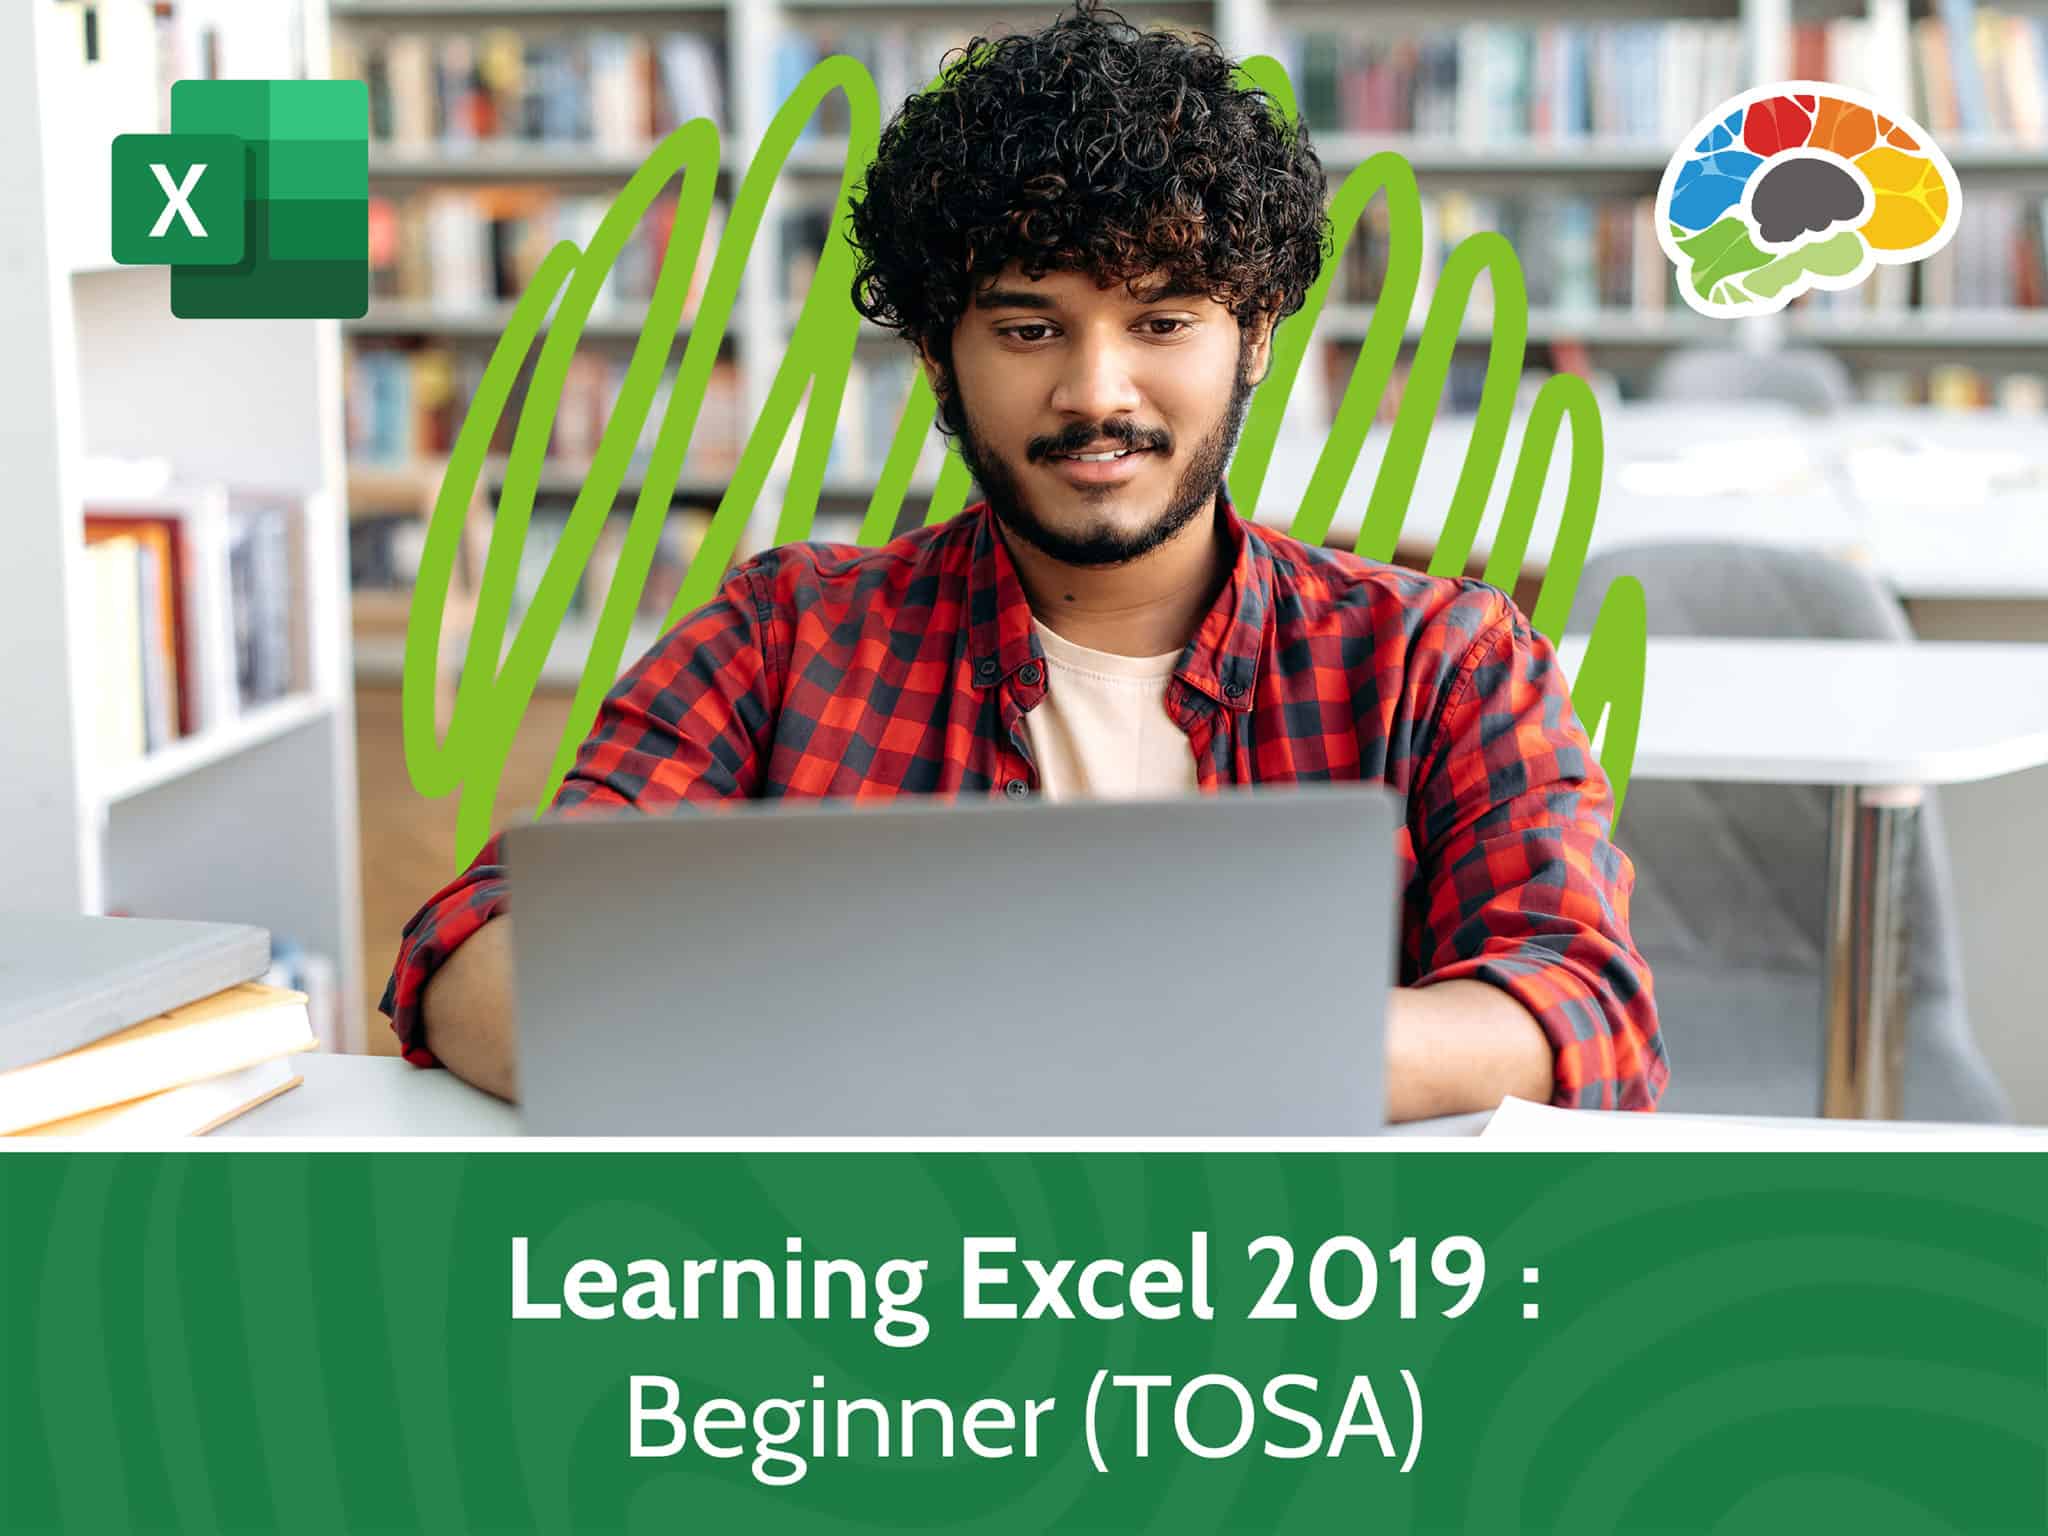 Learning Excel 2019 – Beginner TOSA scaled